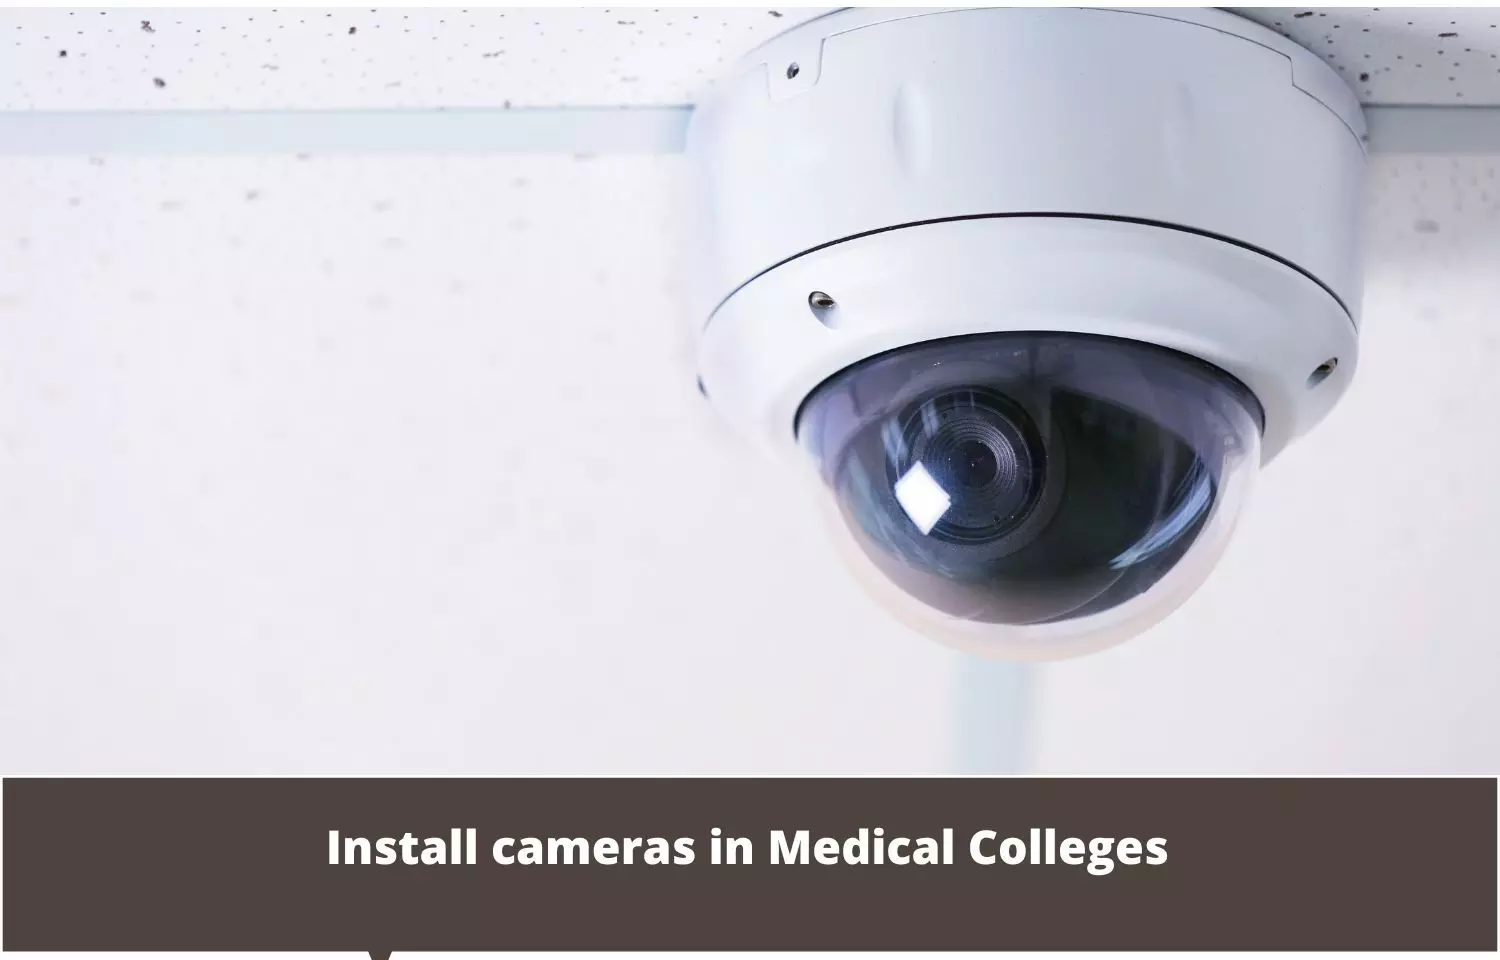 NMC directs all Medical Institutes to install cameras, prescribes list